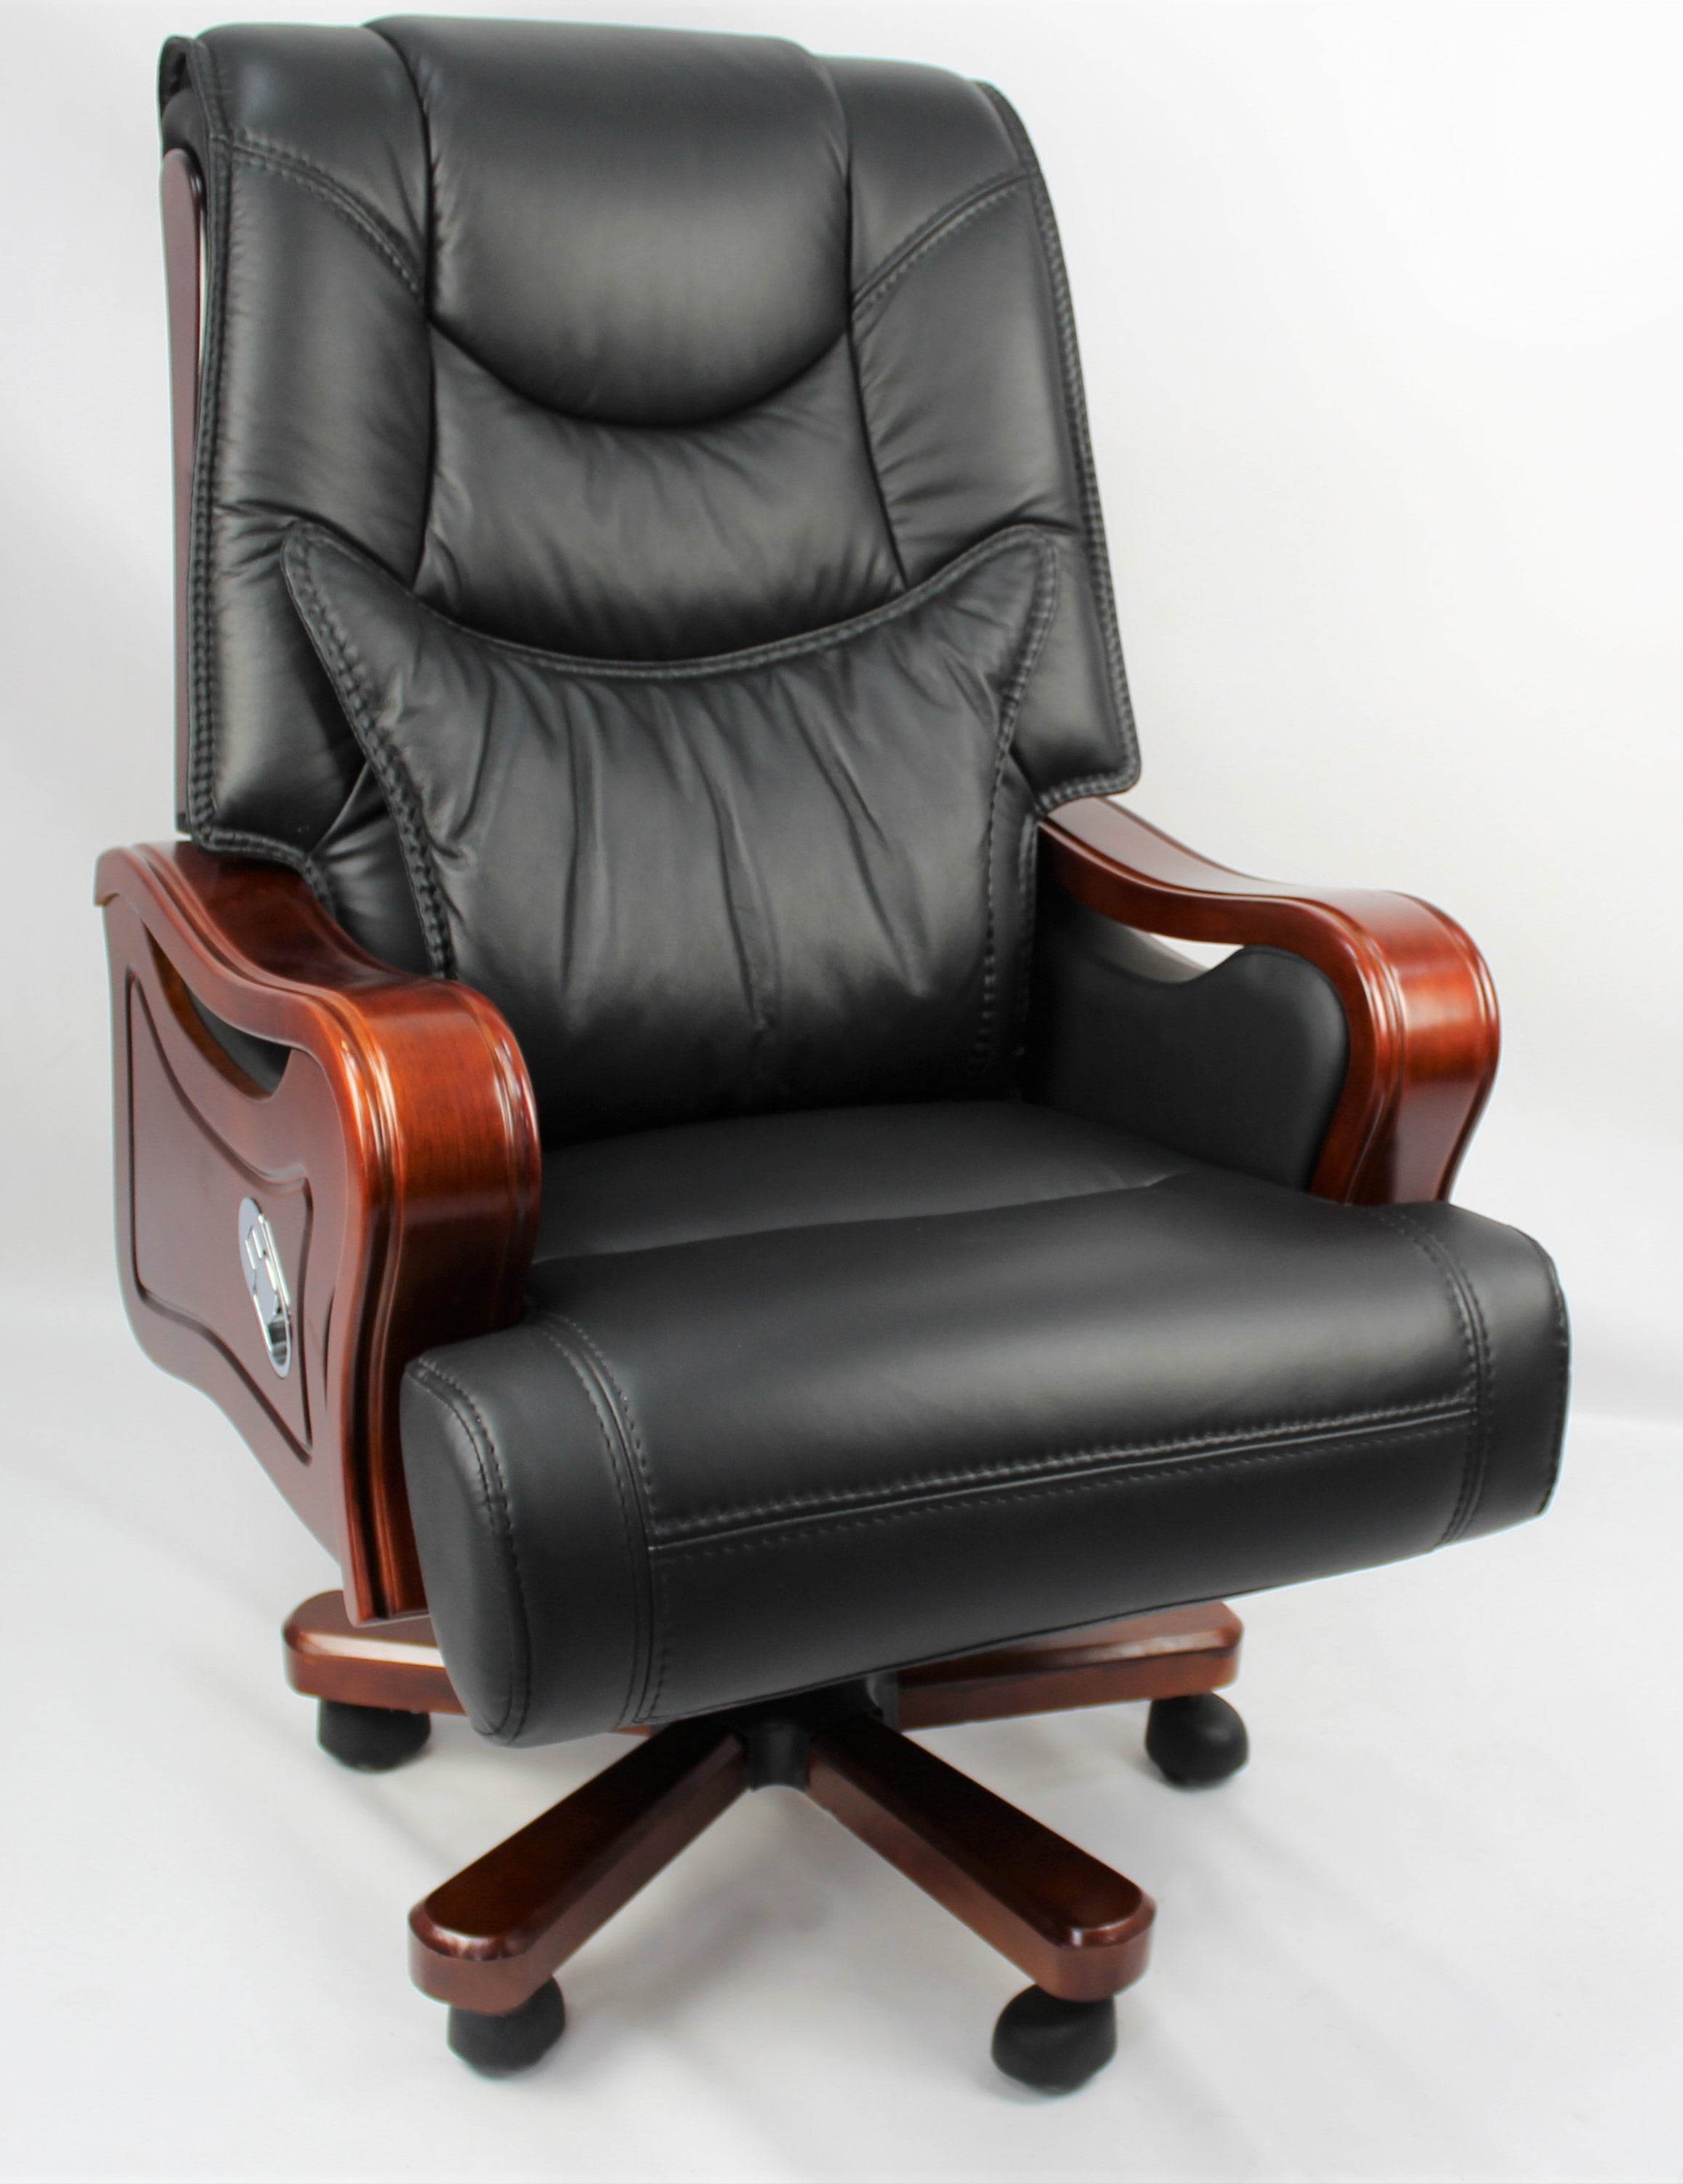 Large Executive Black Leather Office Chair with Wooden Arms - SZ-A768 North Yorkshire